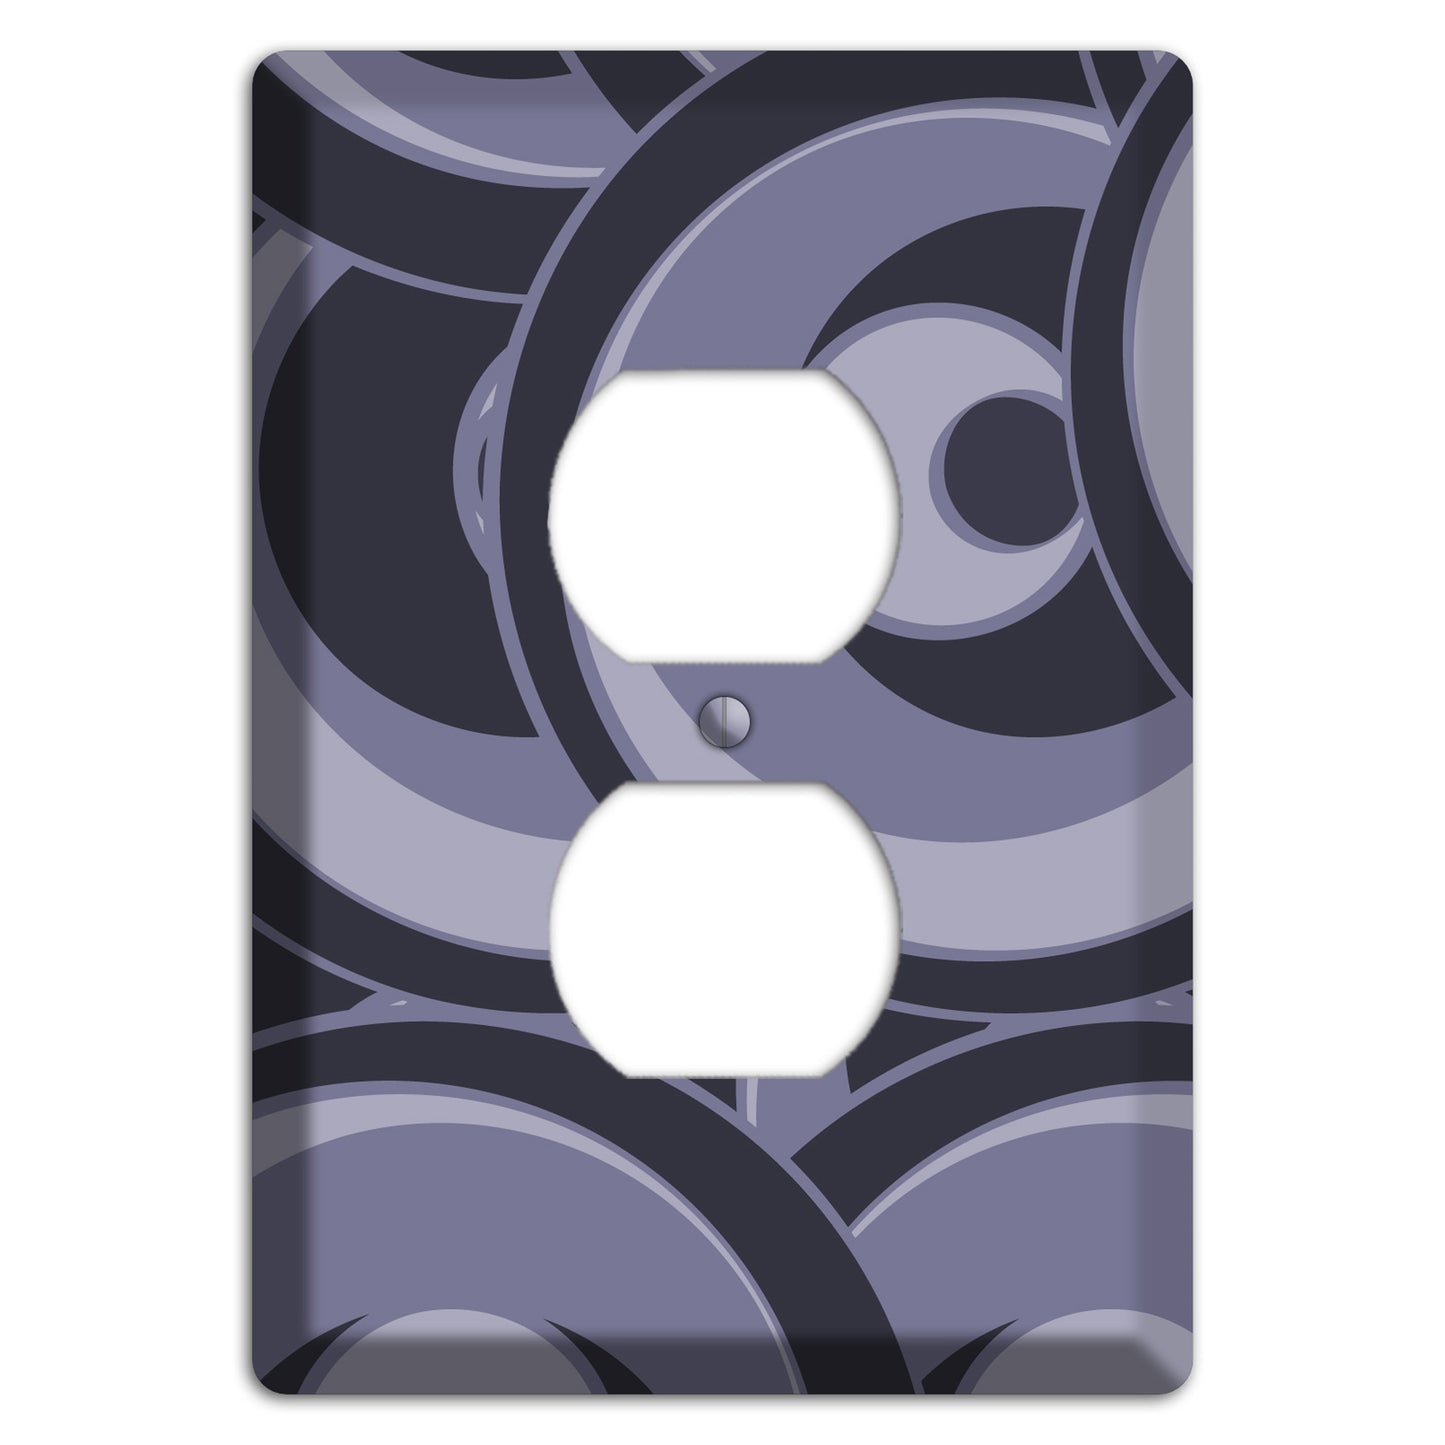 Black and Purple-grey Deco Circles Duplex Outlet Wallplate